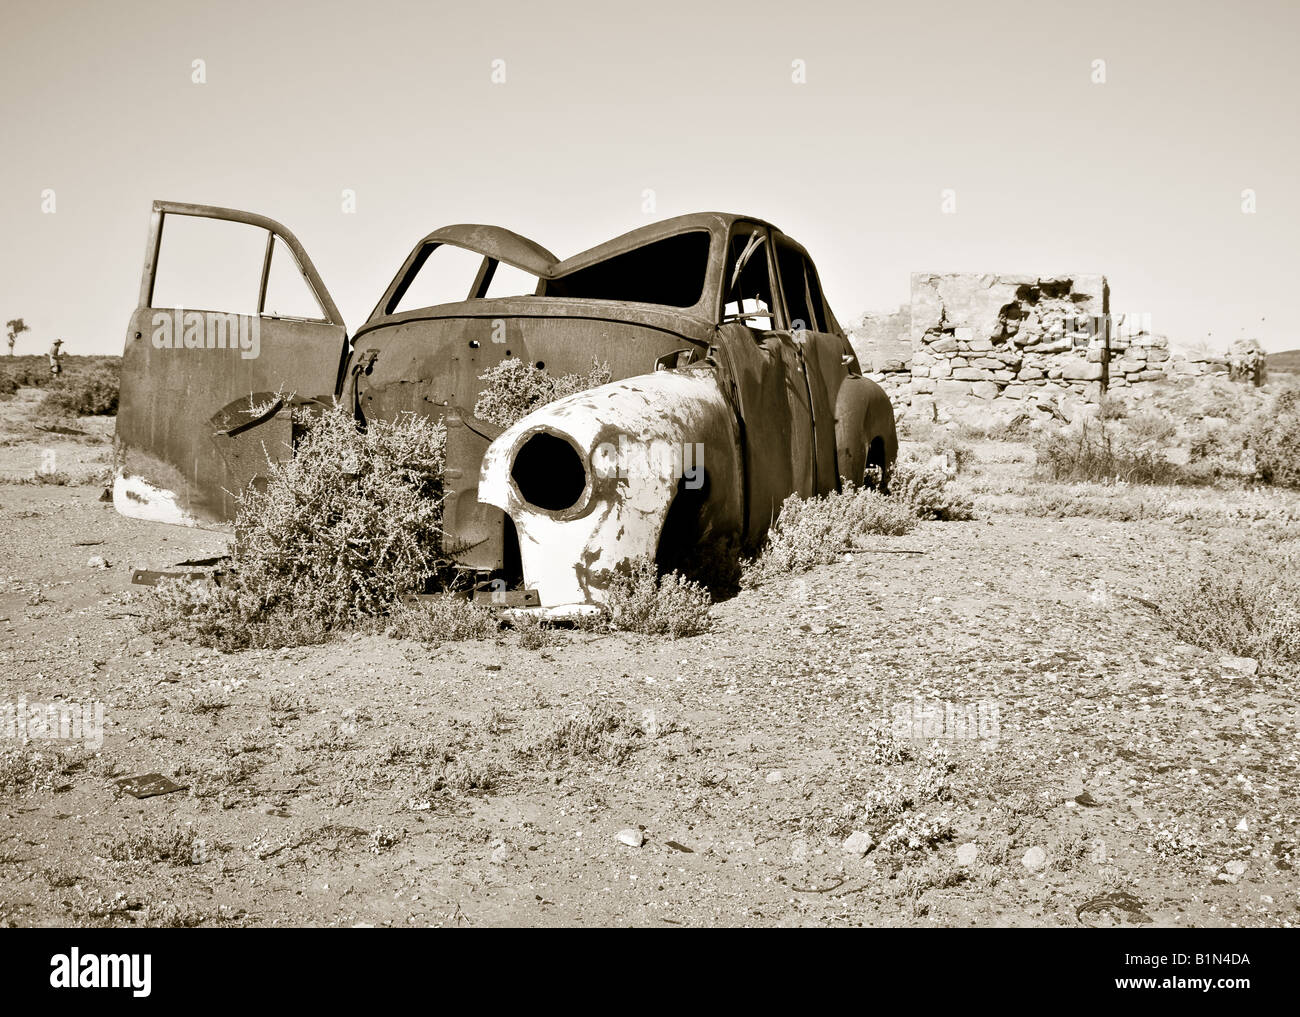 black and white image of an old rusty car in the desert Stock Photo